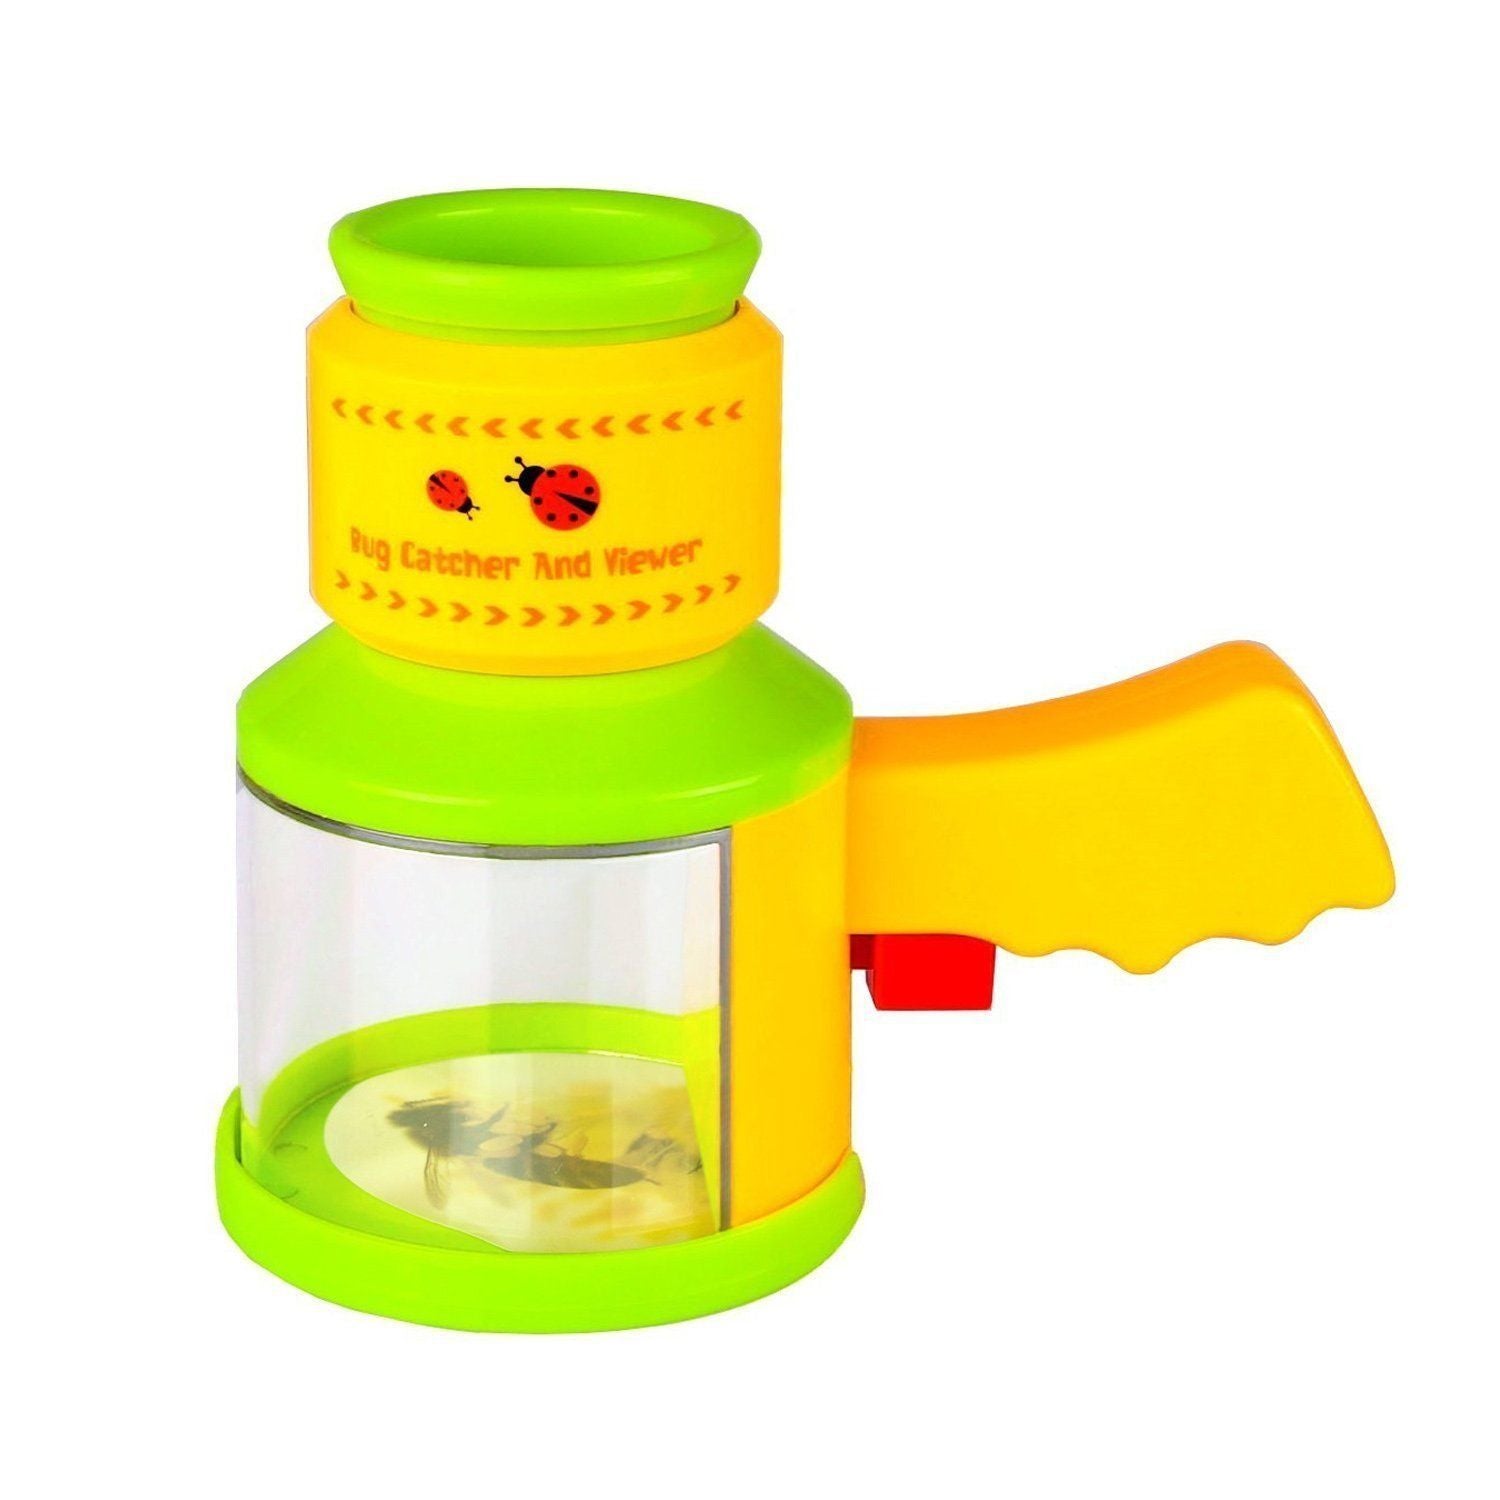 Bug Catcher, Kids Insect Magnifier Backyard Exploration Science